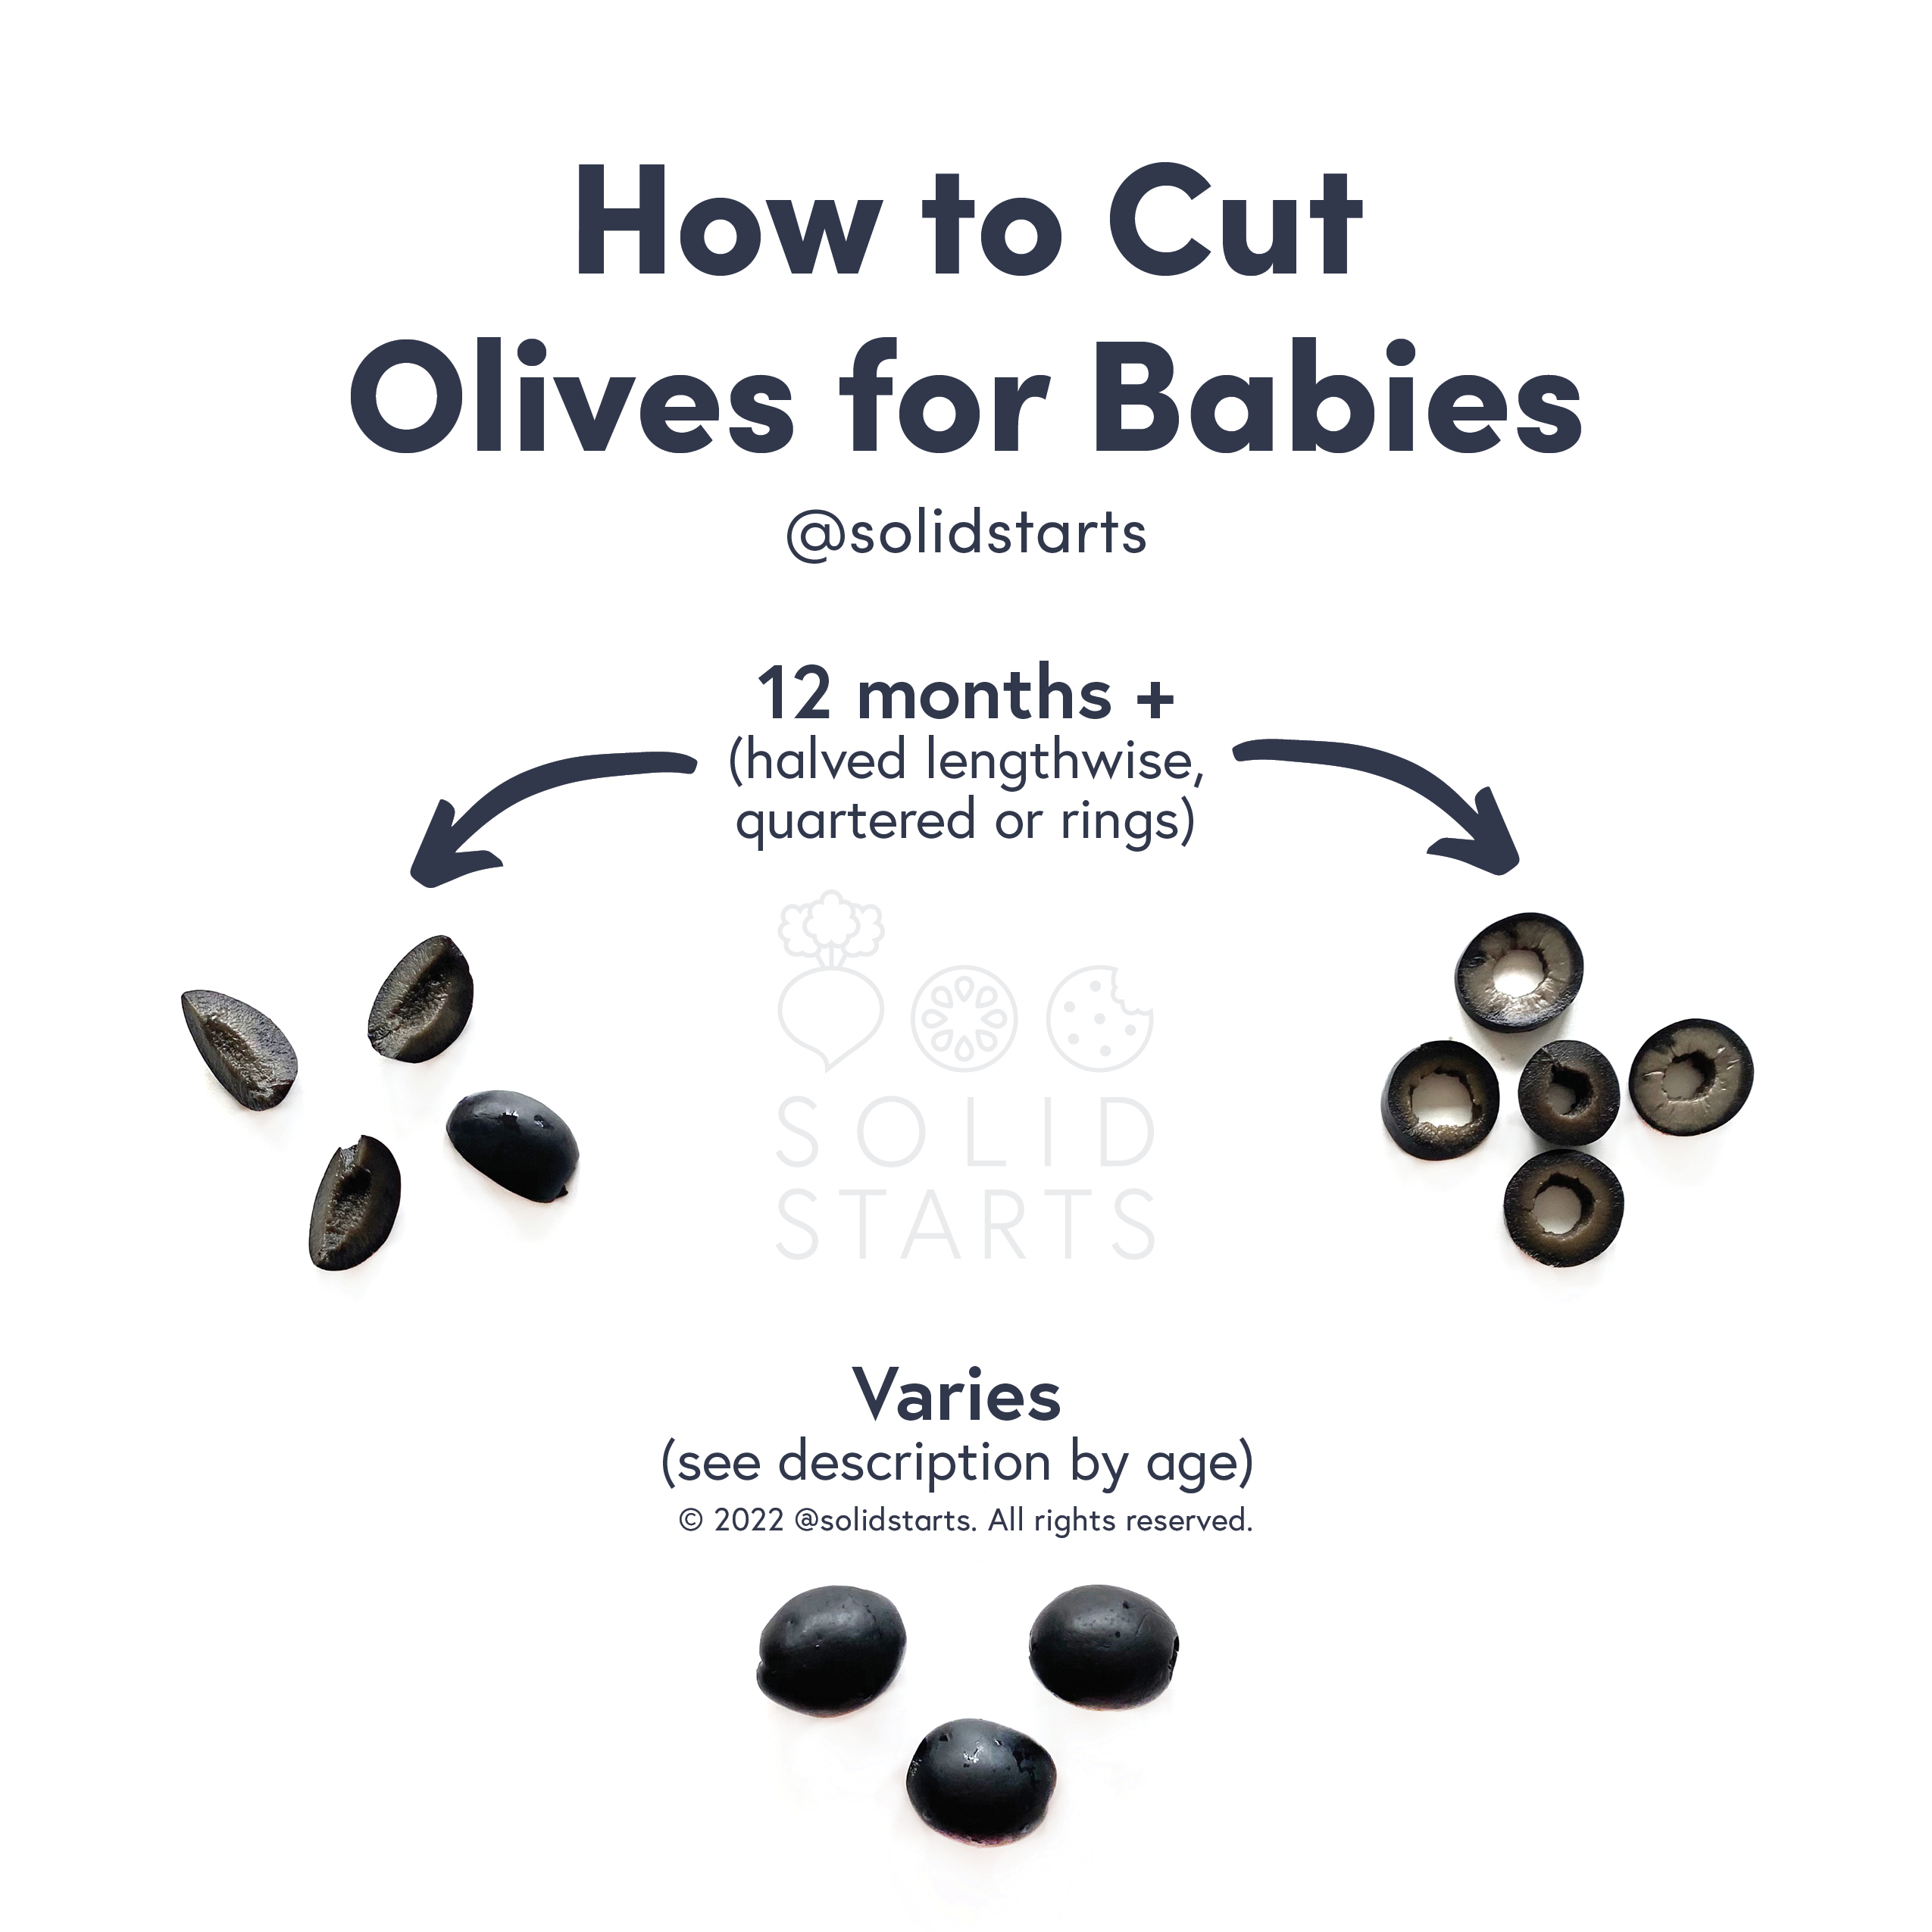 When Can Babies Have Olives? Olives for Baby - Solid Starts